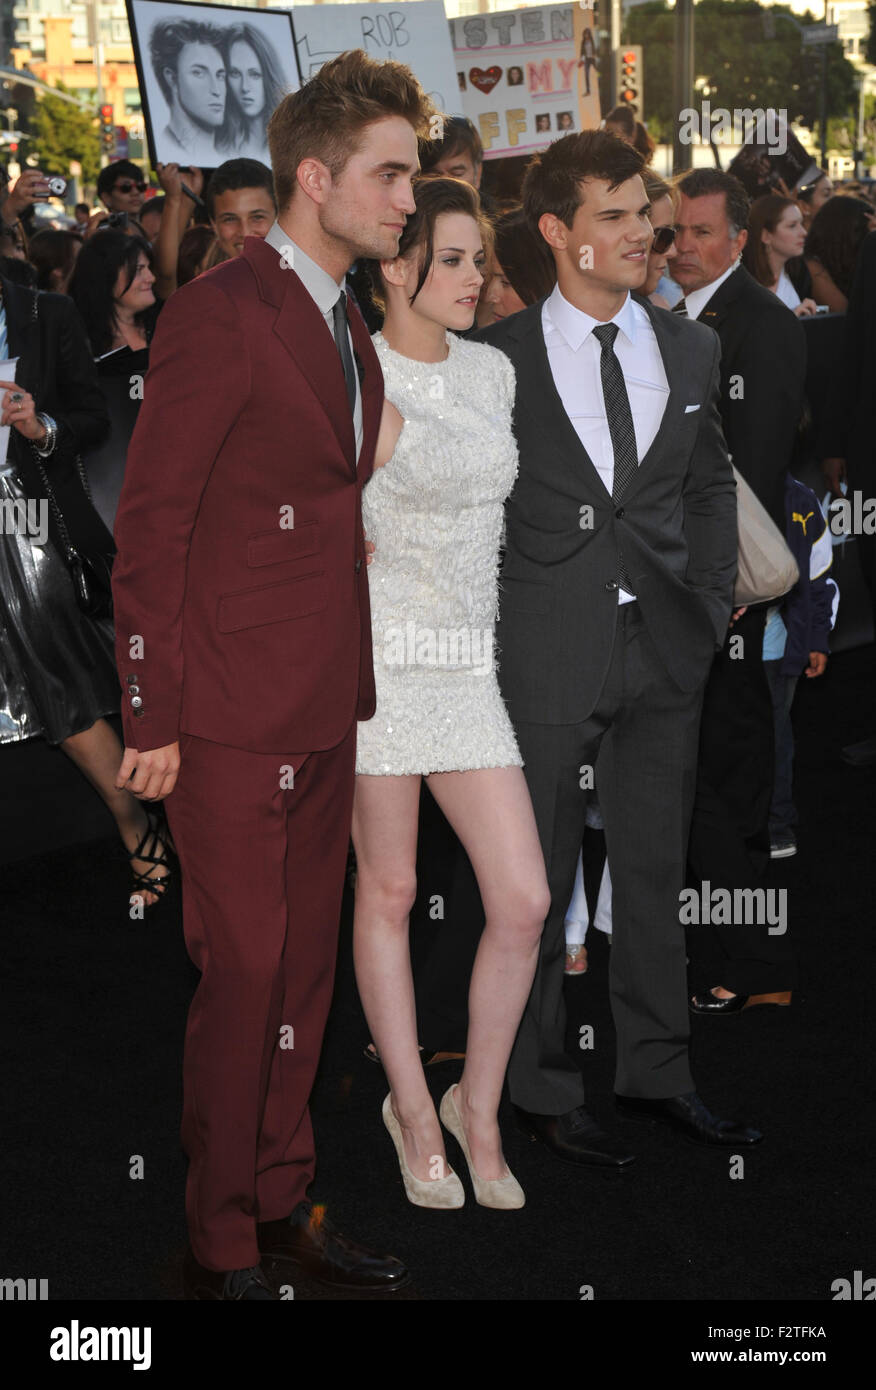 LOS ANGELES, CA - JUNE 24, 2010: Taylor Lautner (right), Kristen Stewart & Robert Pattinson at the premiere of their new movie 'The Twilight Saga: Eclipse' at the Nokia Theatre at L.A. Live. Stock Photo